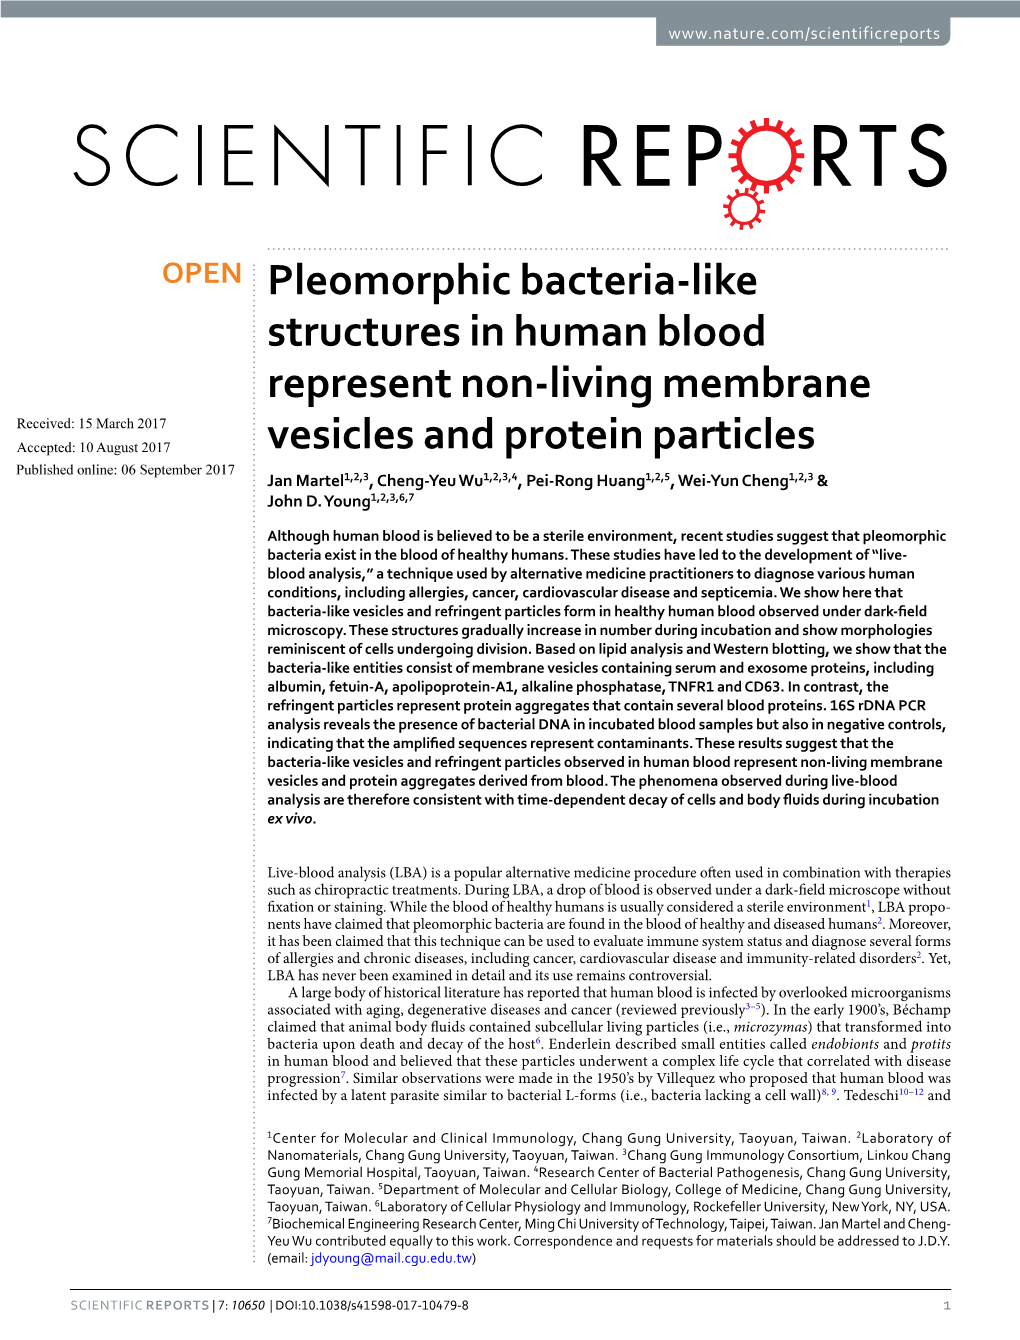 Pleomorphic Bacteria-Like Structures in Human Blood Represent Non-Living